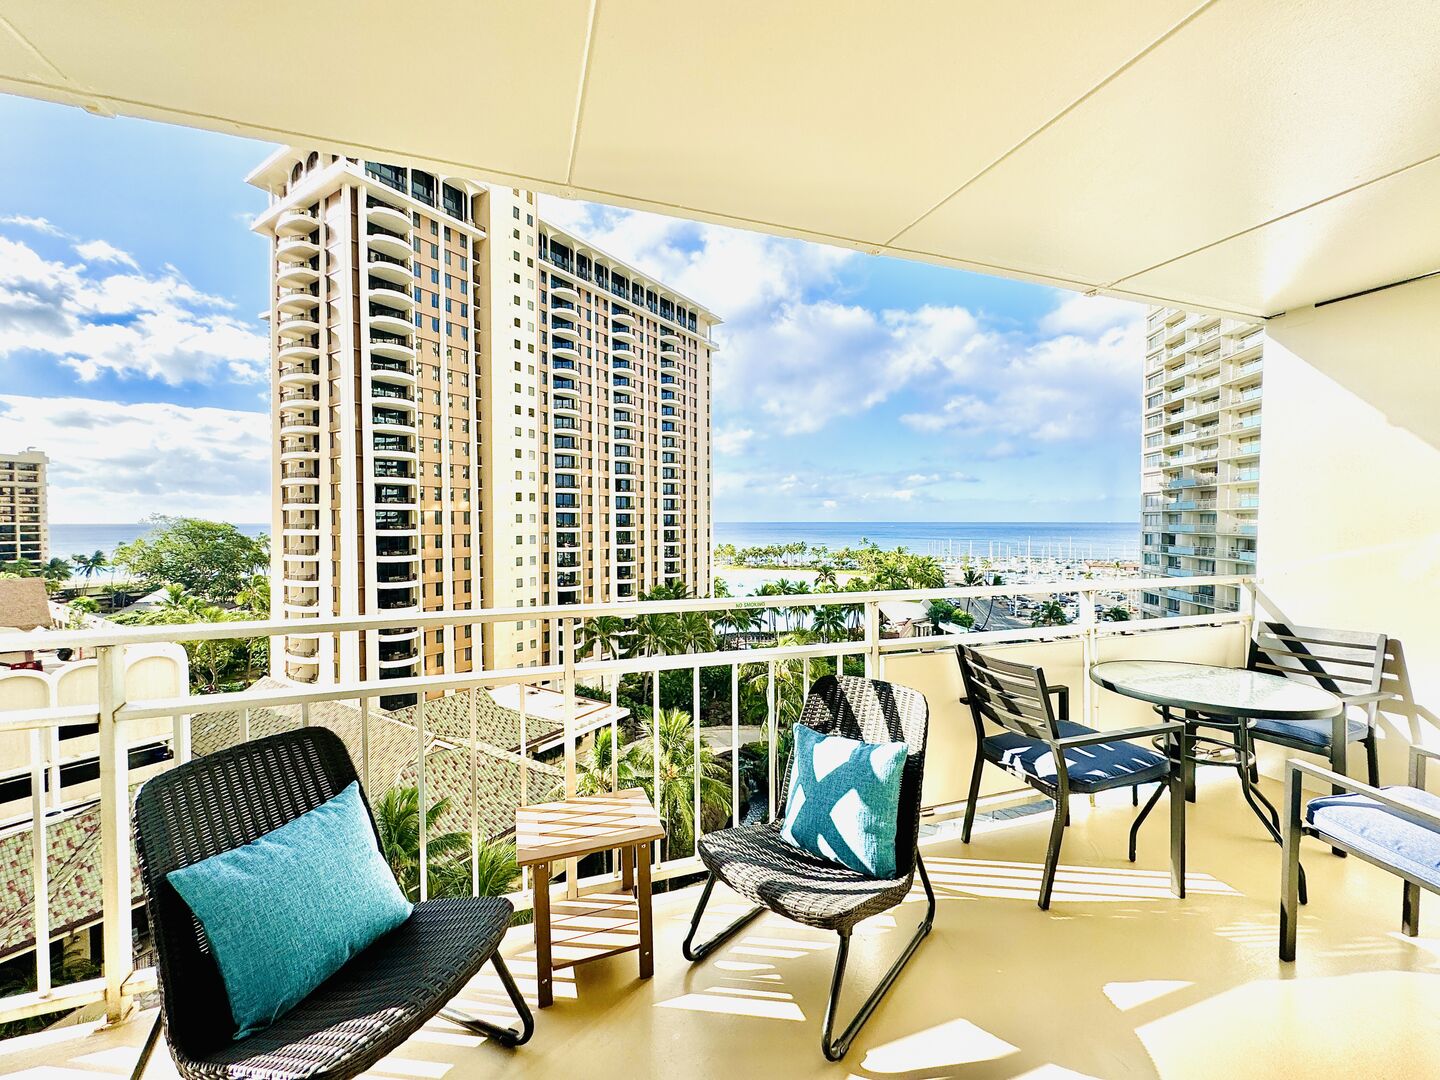 Lanai balcony with patio sets perfect for your coffee time.